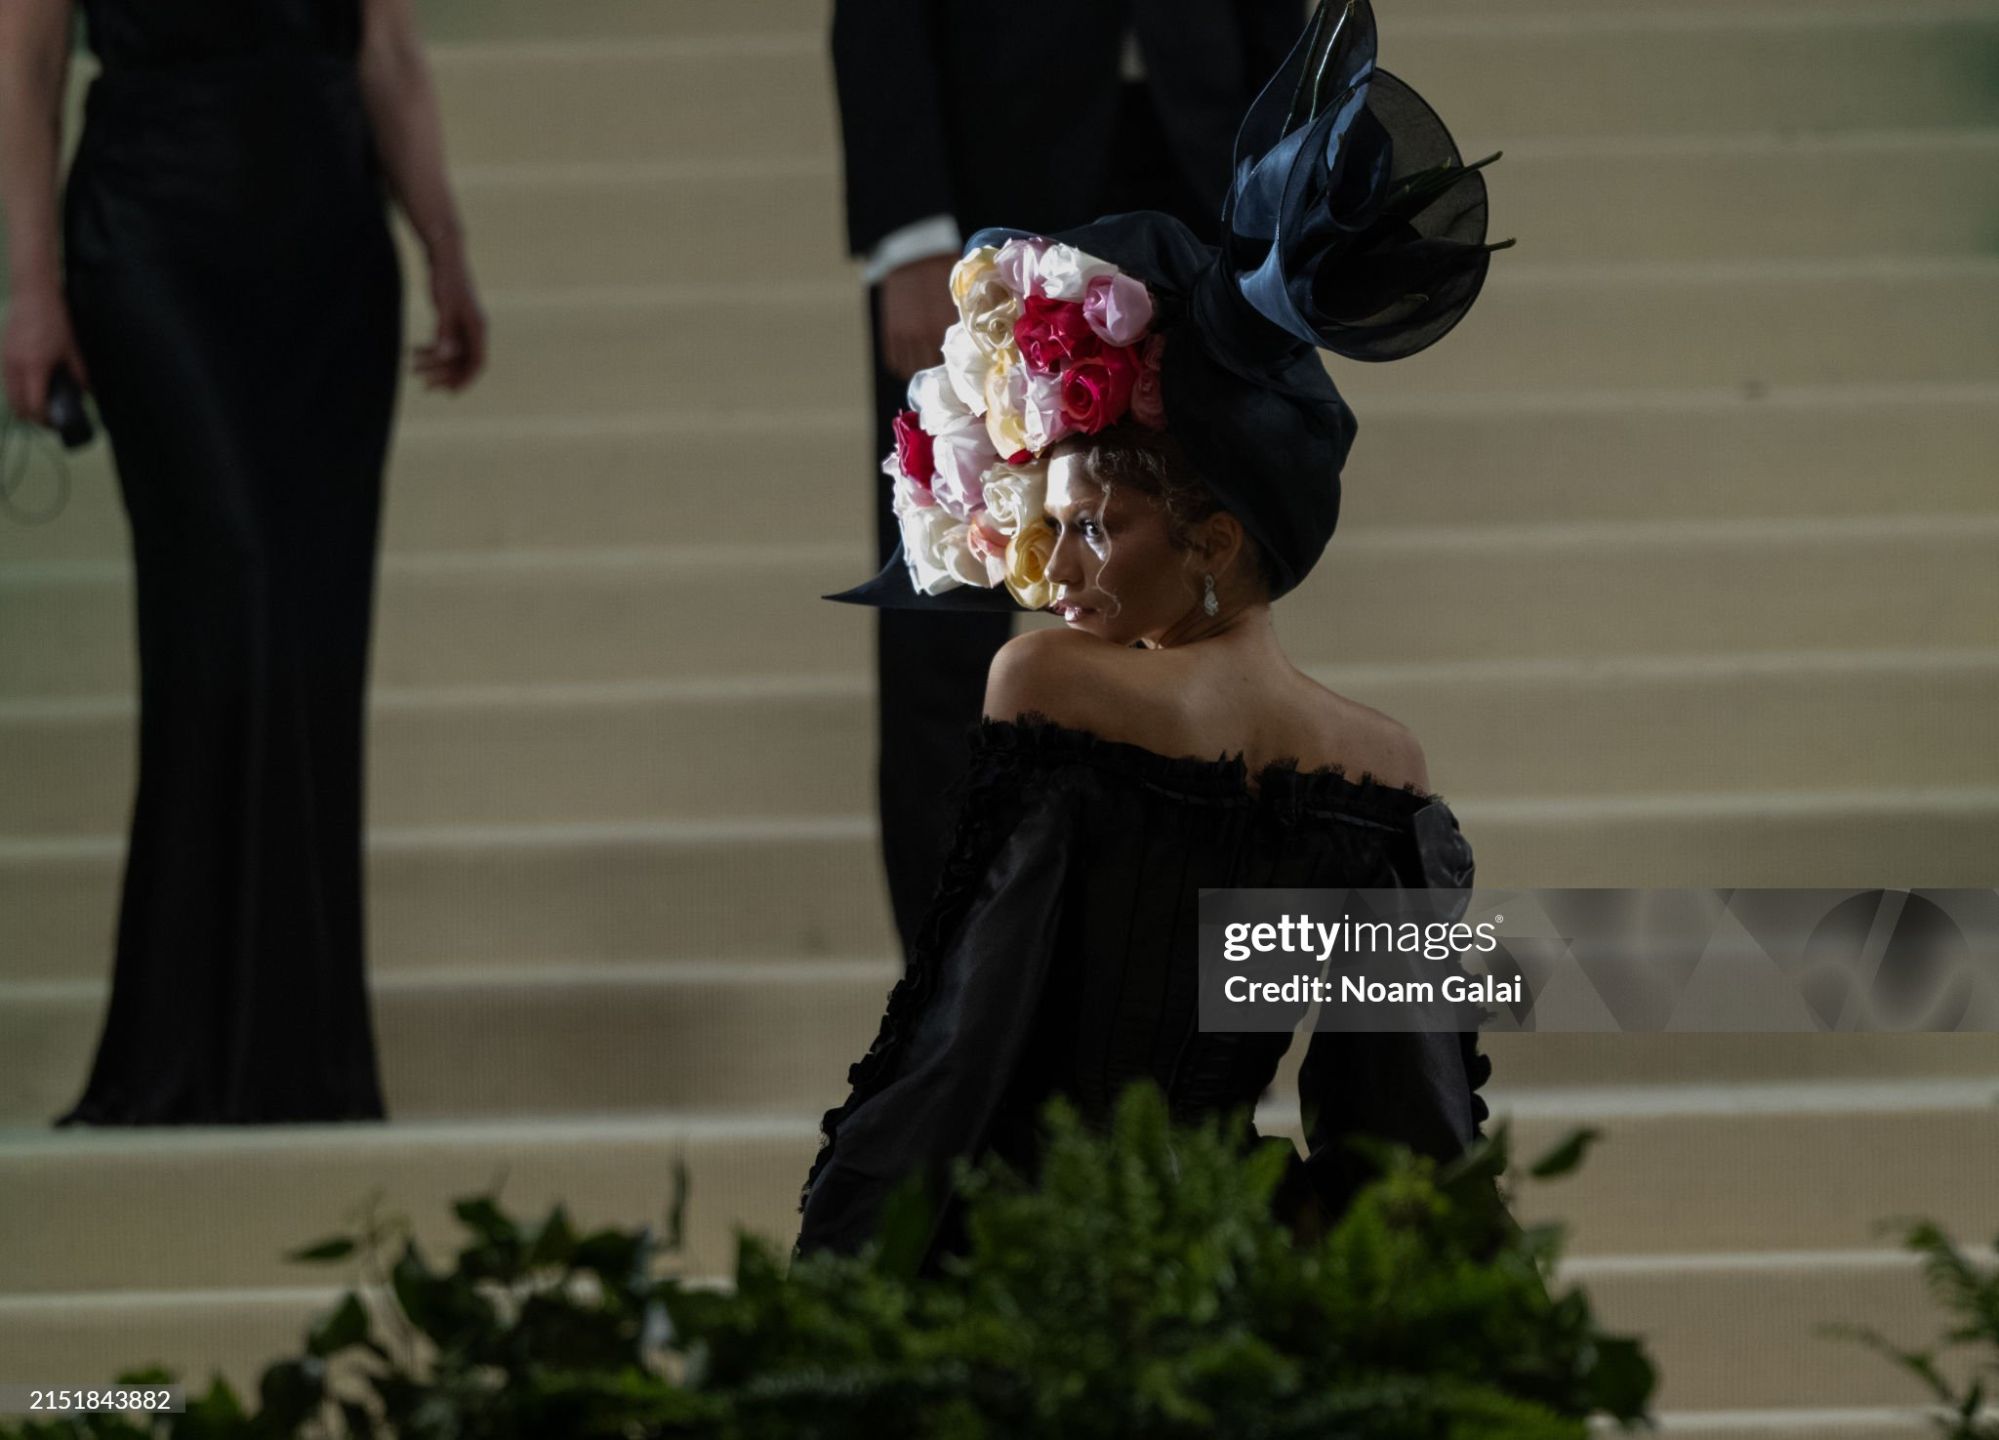 gettyimages-2151843882-2048x2048.jpg